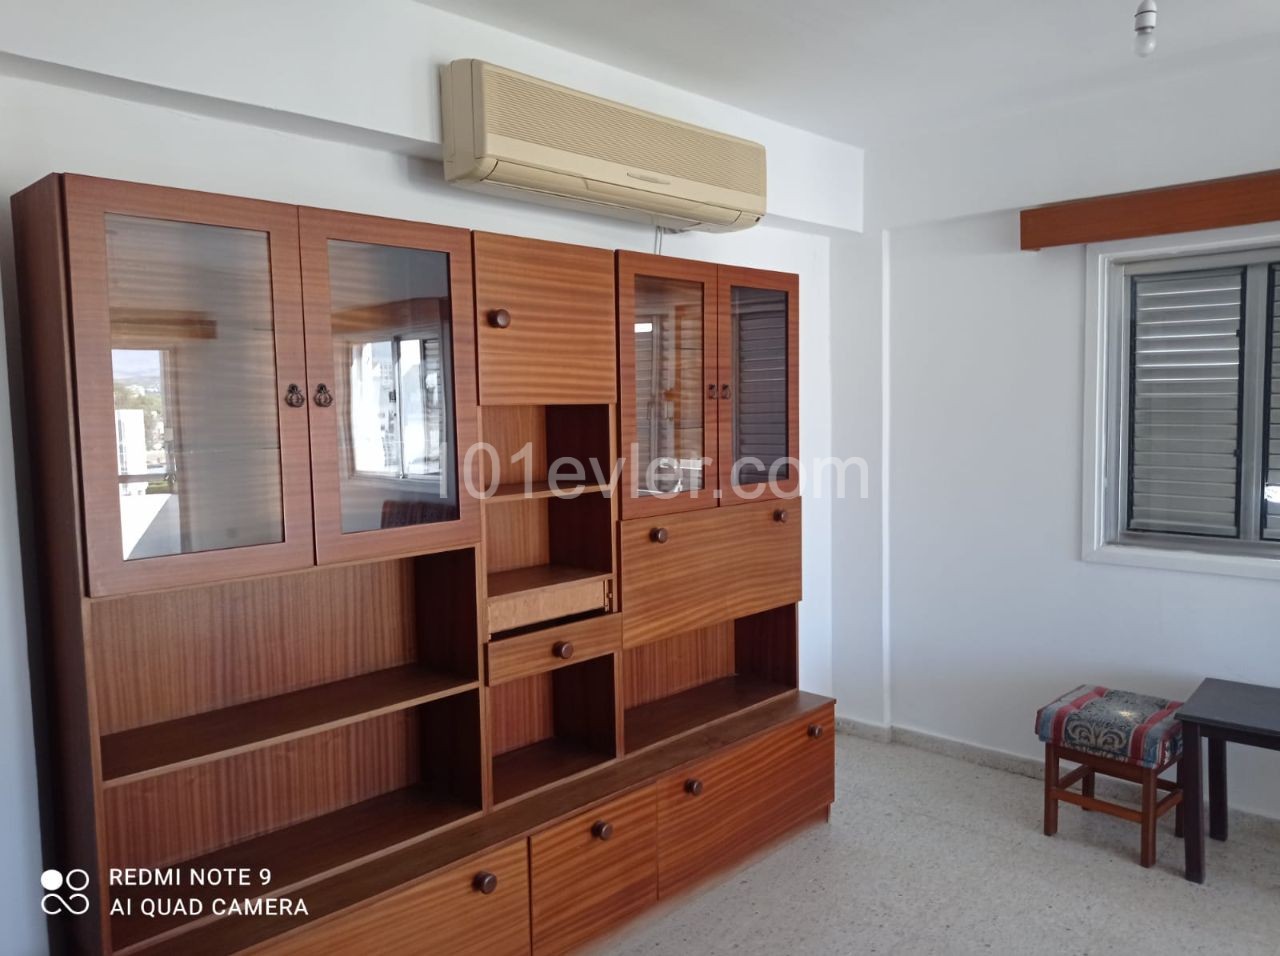 Apartment for sale in Ortaköy in the center of commercial leave